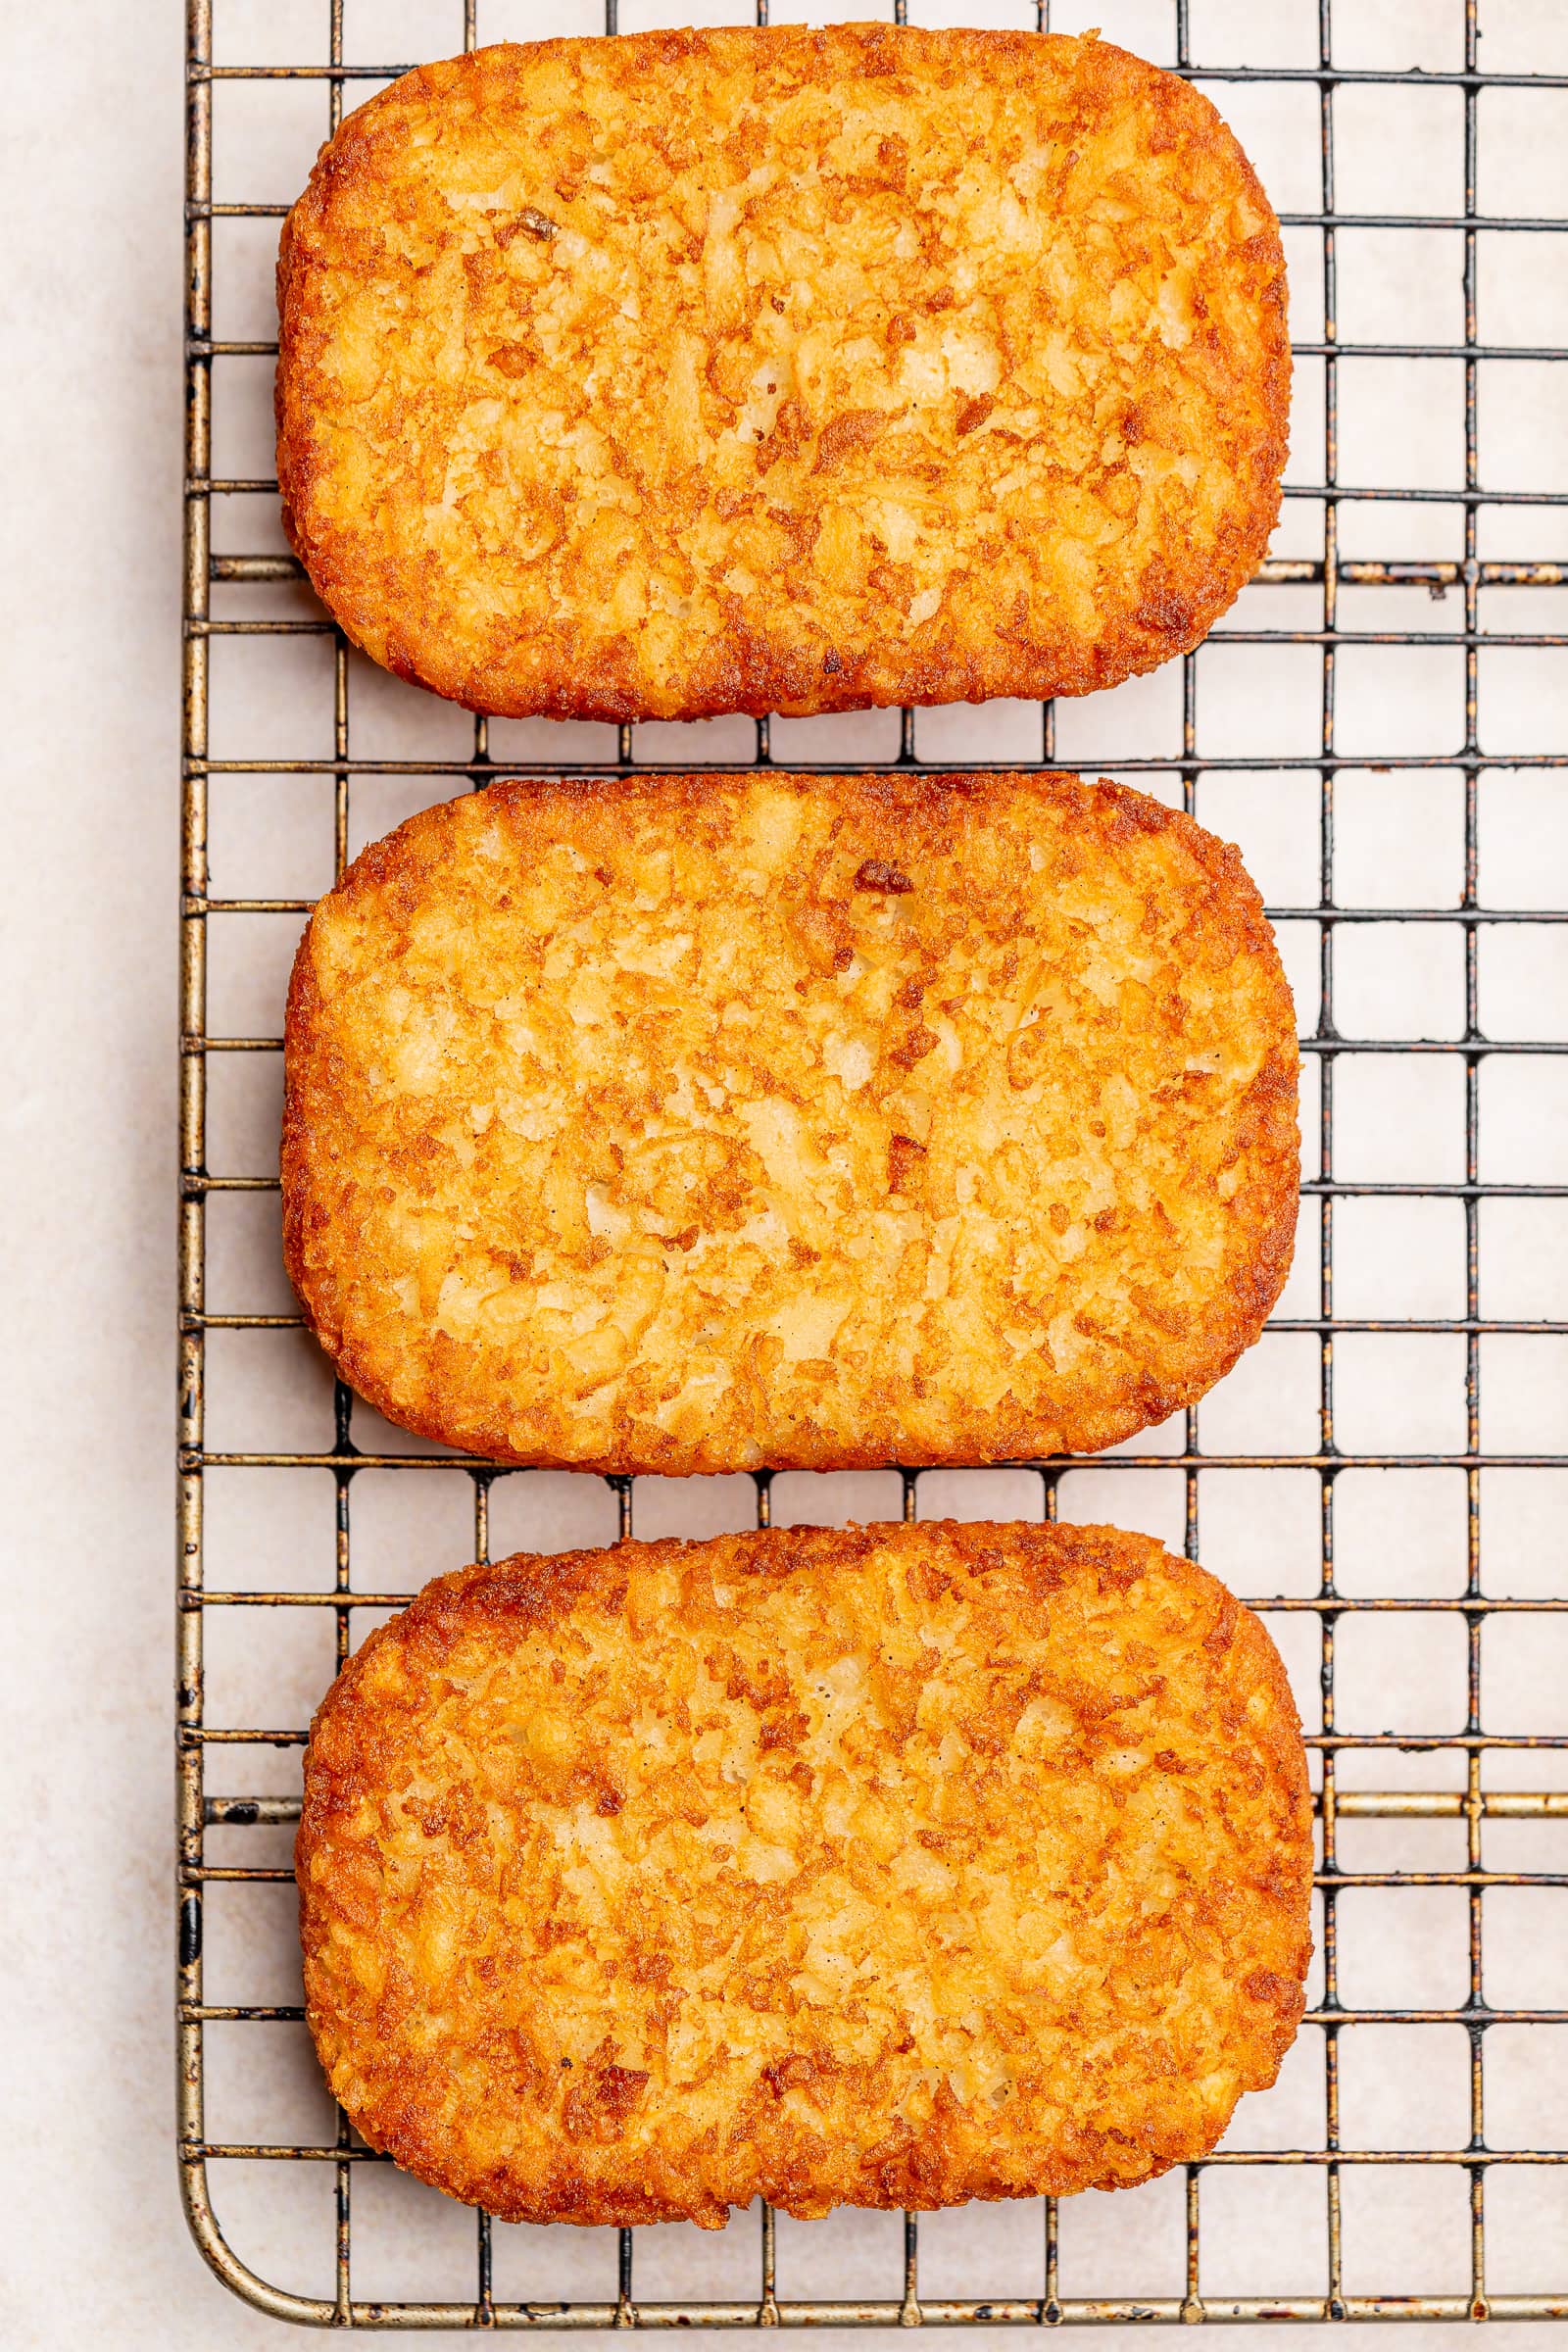 Crispy, air-fried hash browns on a wire rack.